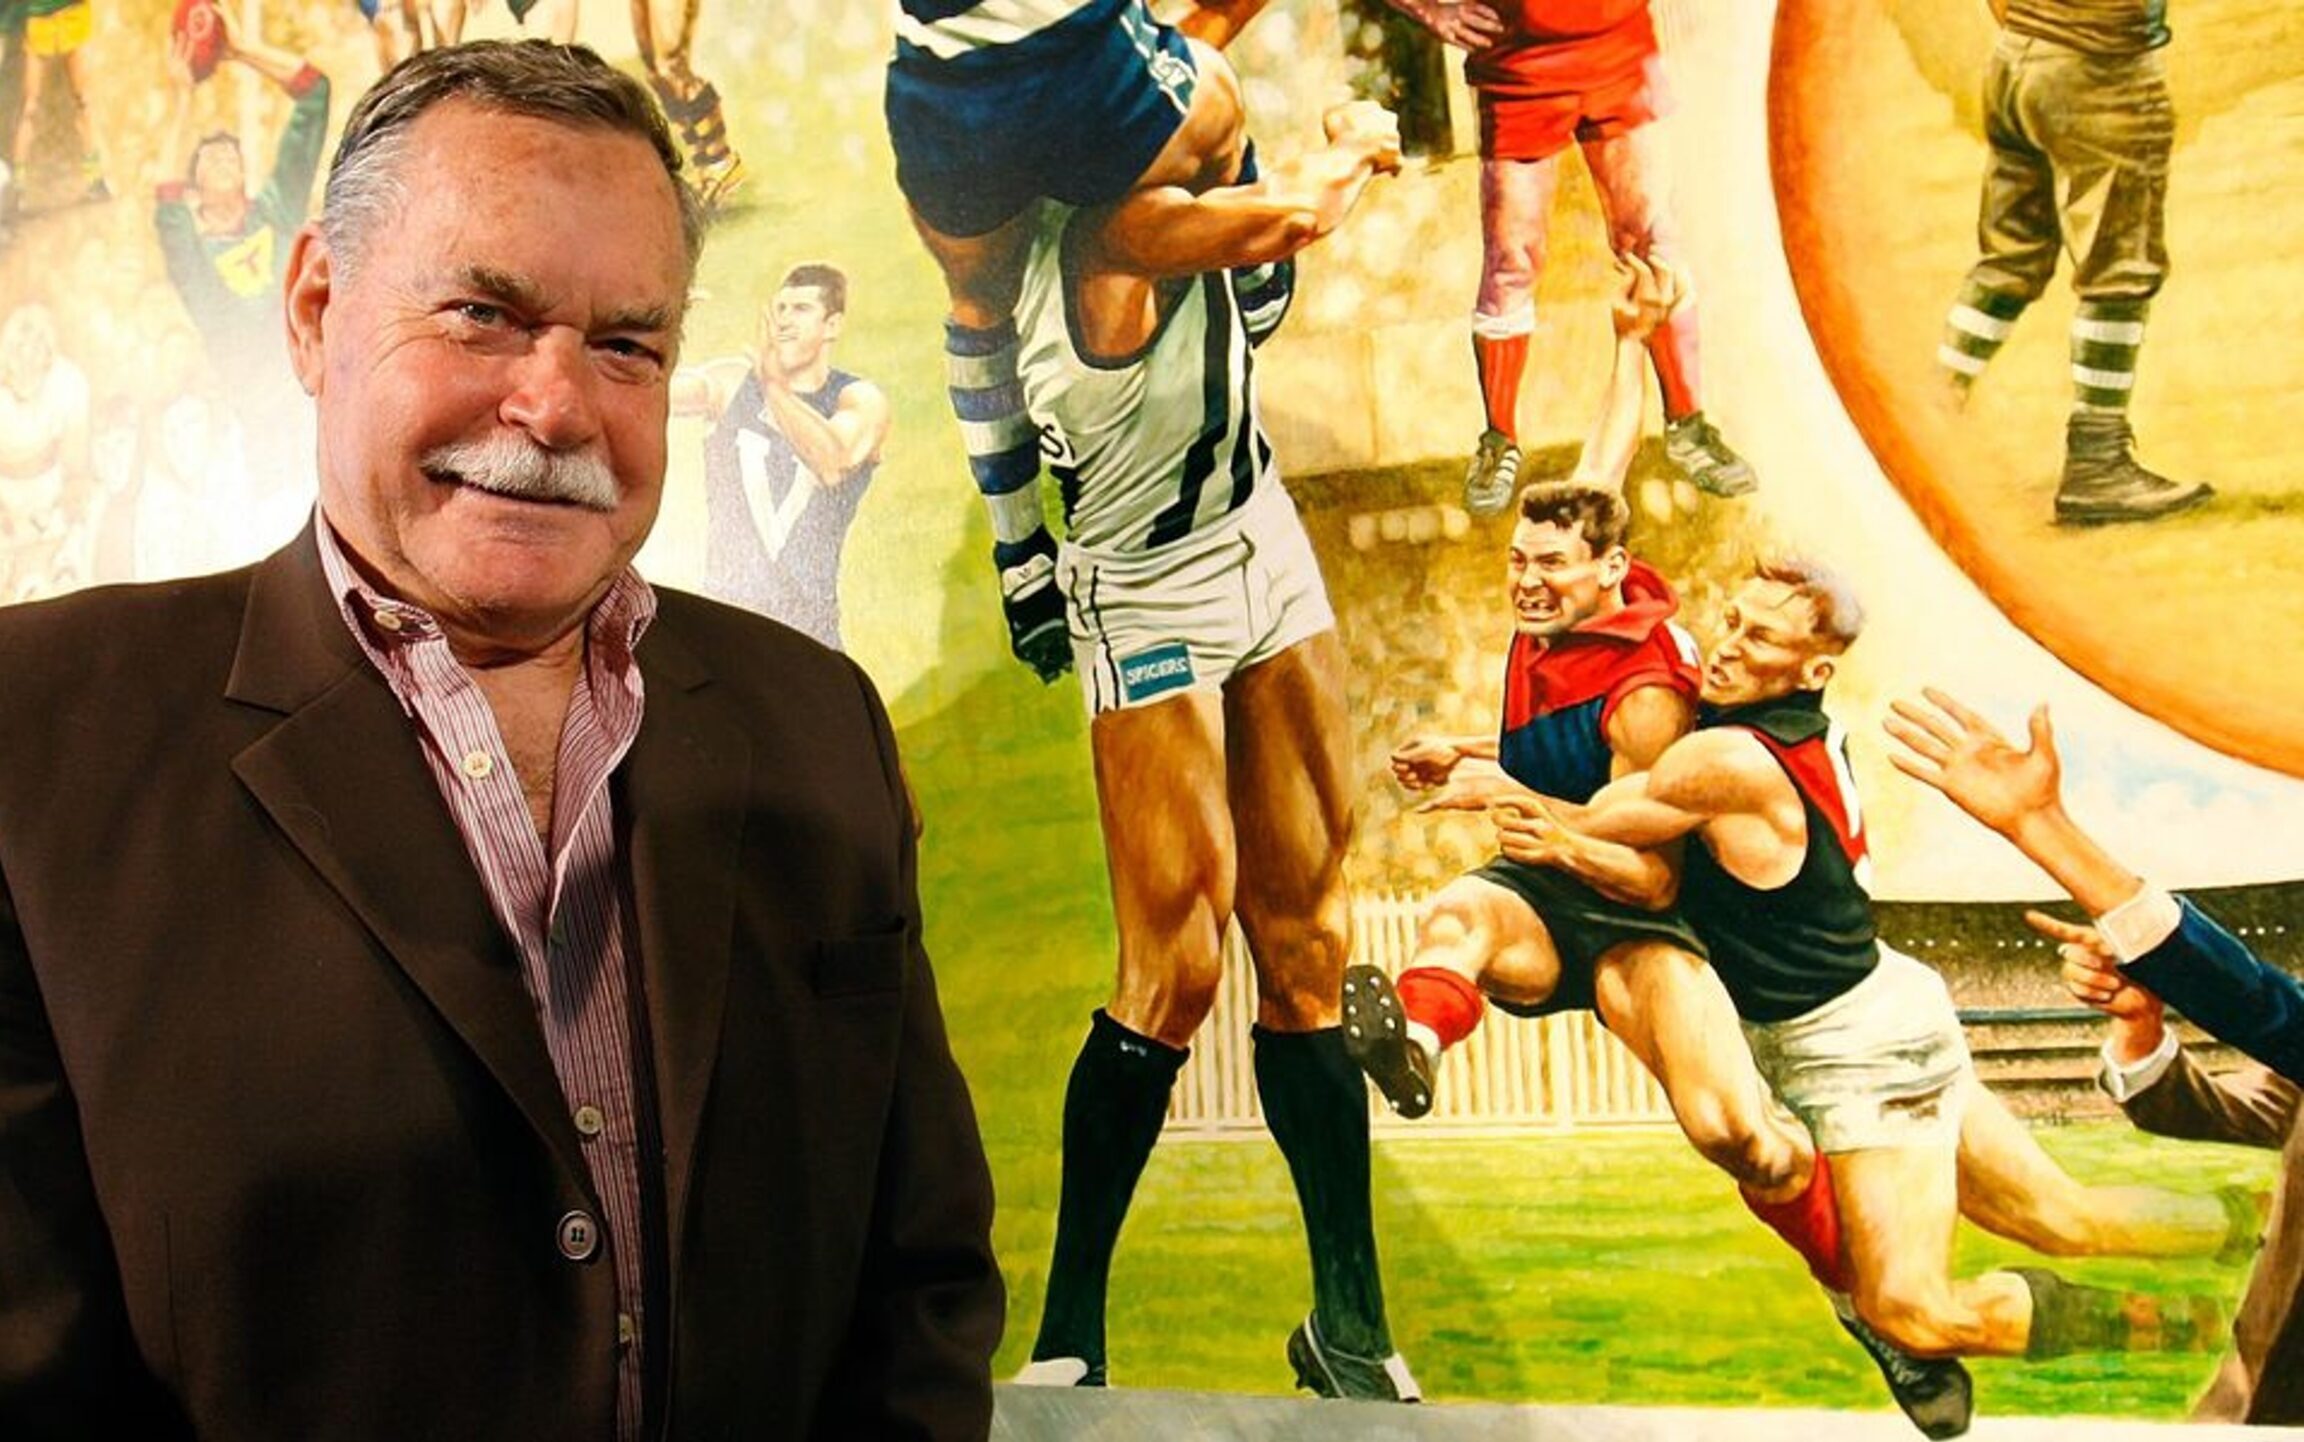 Ron Barassi State Memorial Service on Channel 7